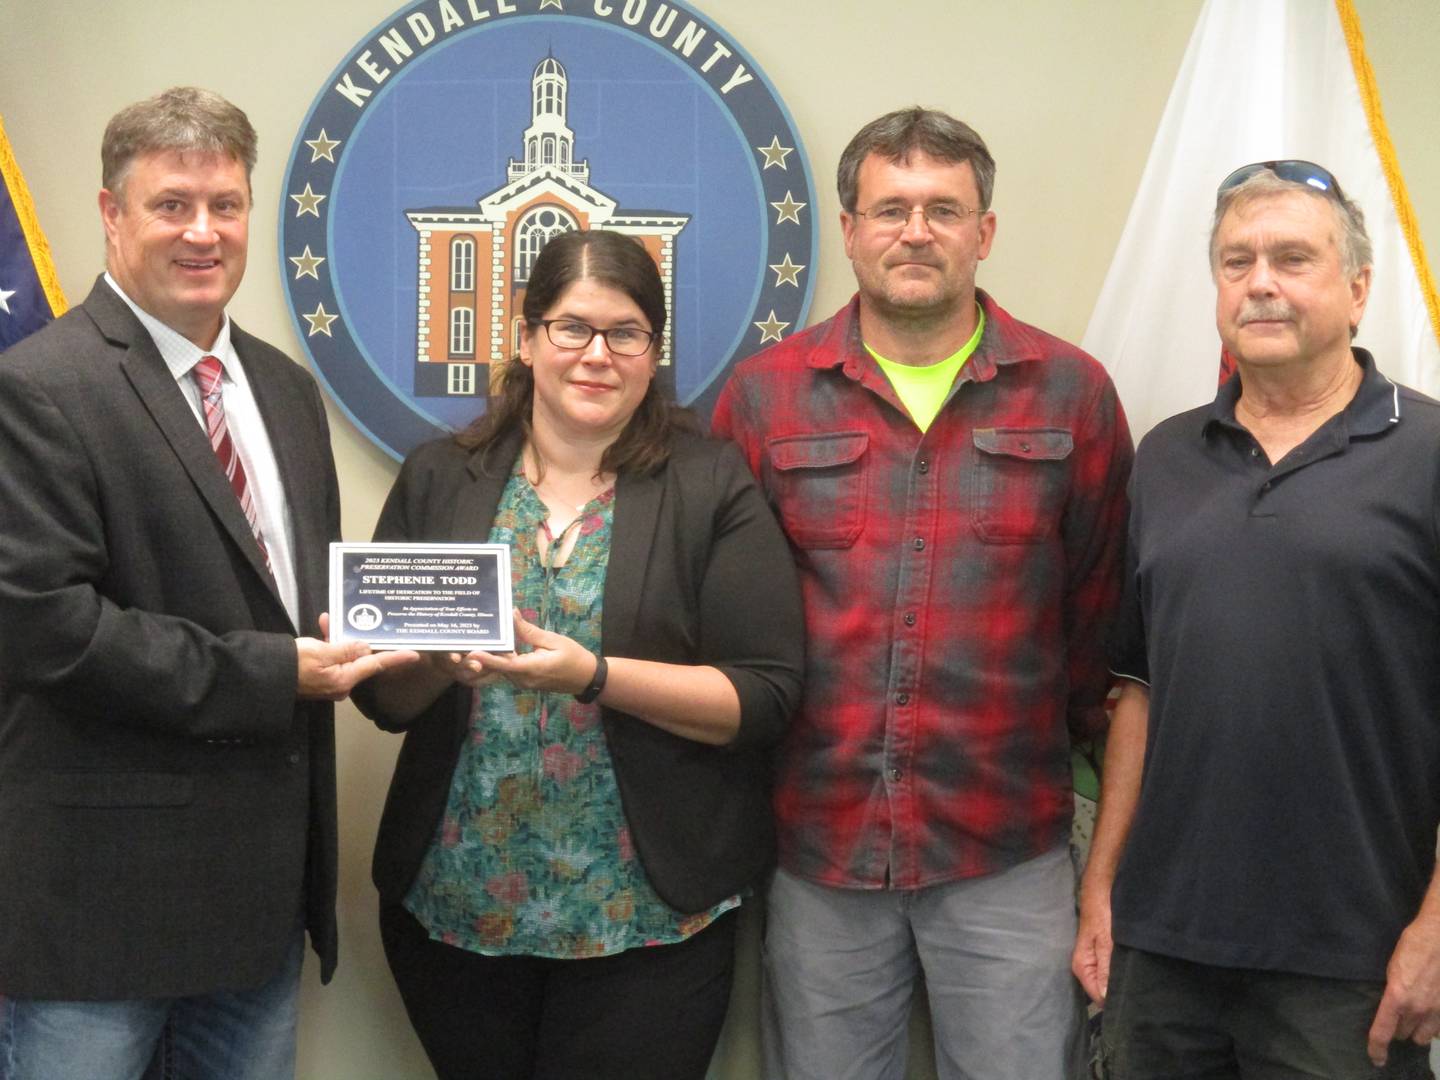 The Kendall County Historic Preservation Commission honored the late Stephenie Todd with a lifetime achievement award at the May 16, 2023 Kendall County Board meeting. From left are County Board Chairman Matt Kellogg, Todd's daughter Julie Rogers, son Tom Todd and Preservation Commission Chairman Jeff Wehrli.